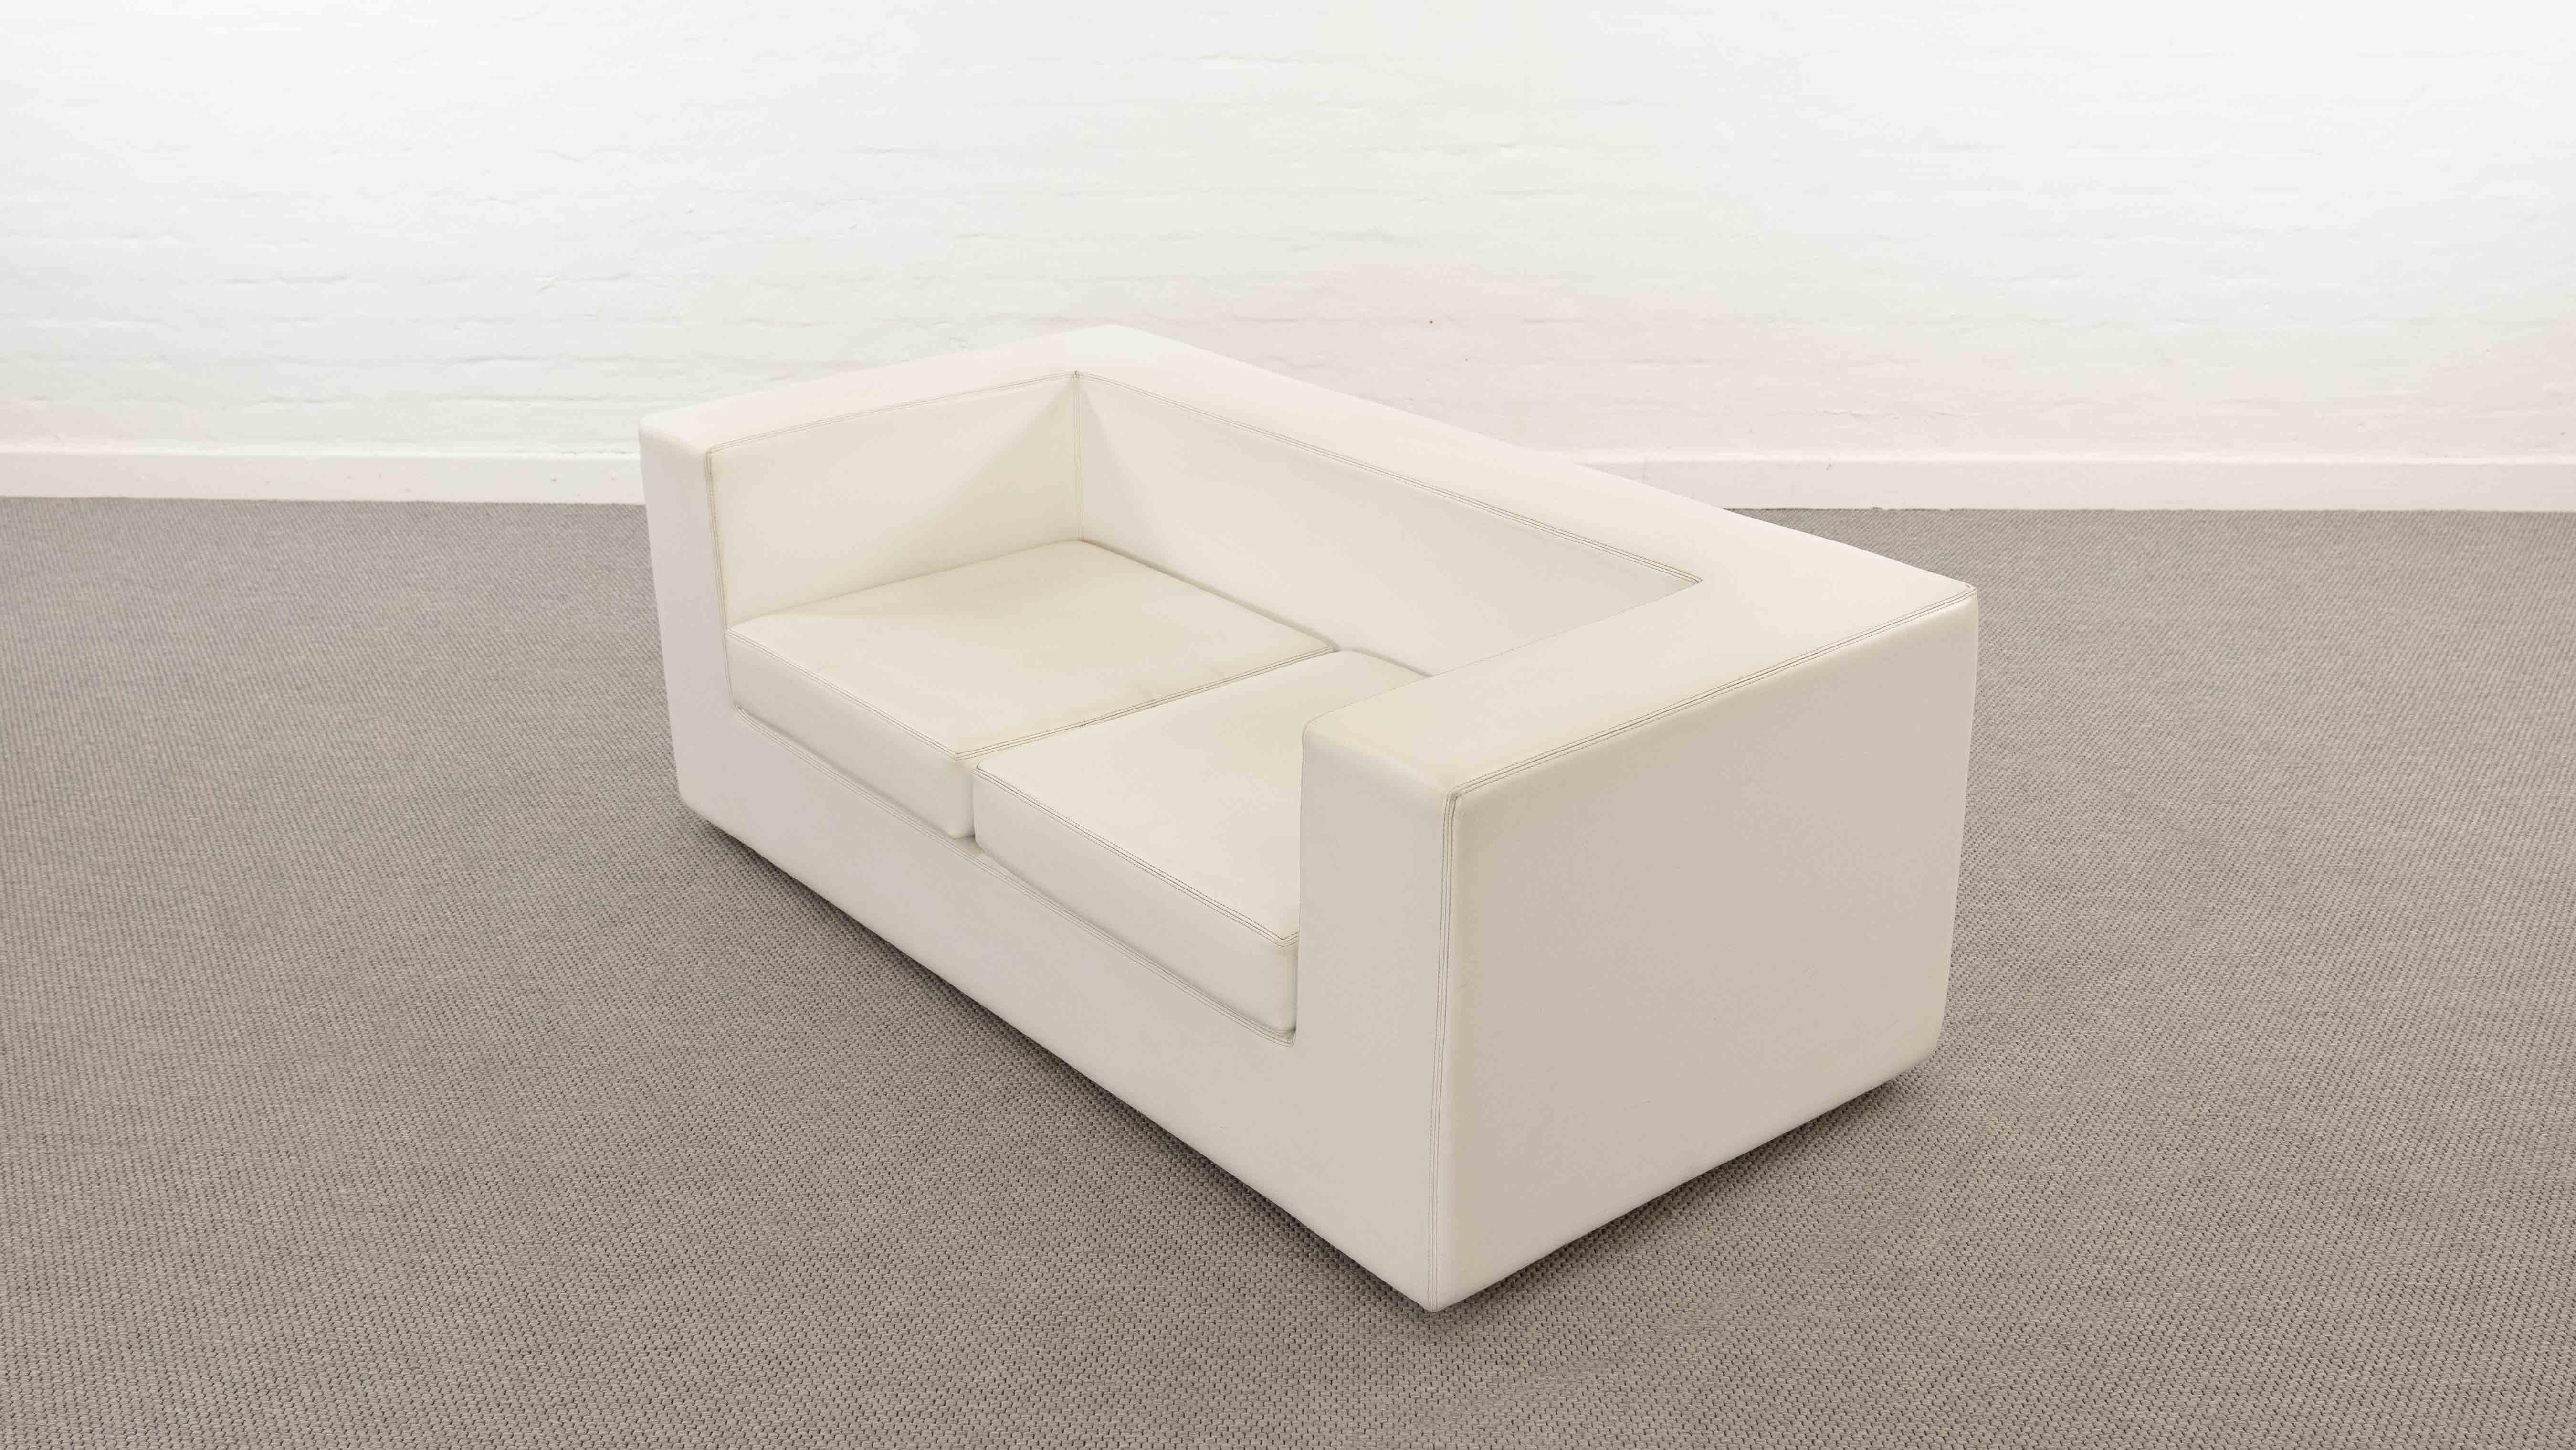 Vintage 2seat sofa, model “ Throw Away“. Designed by Willie Landels 1965 for Zanotta, Italy. The Throw Away Series was the first sofa/armchair made from expanded polyurethane foam. Upholstered in original white /offwhite vinyl. This is a production